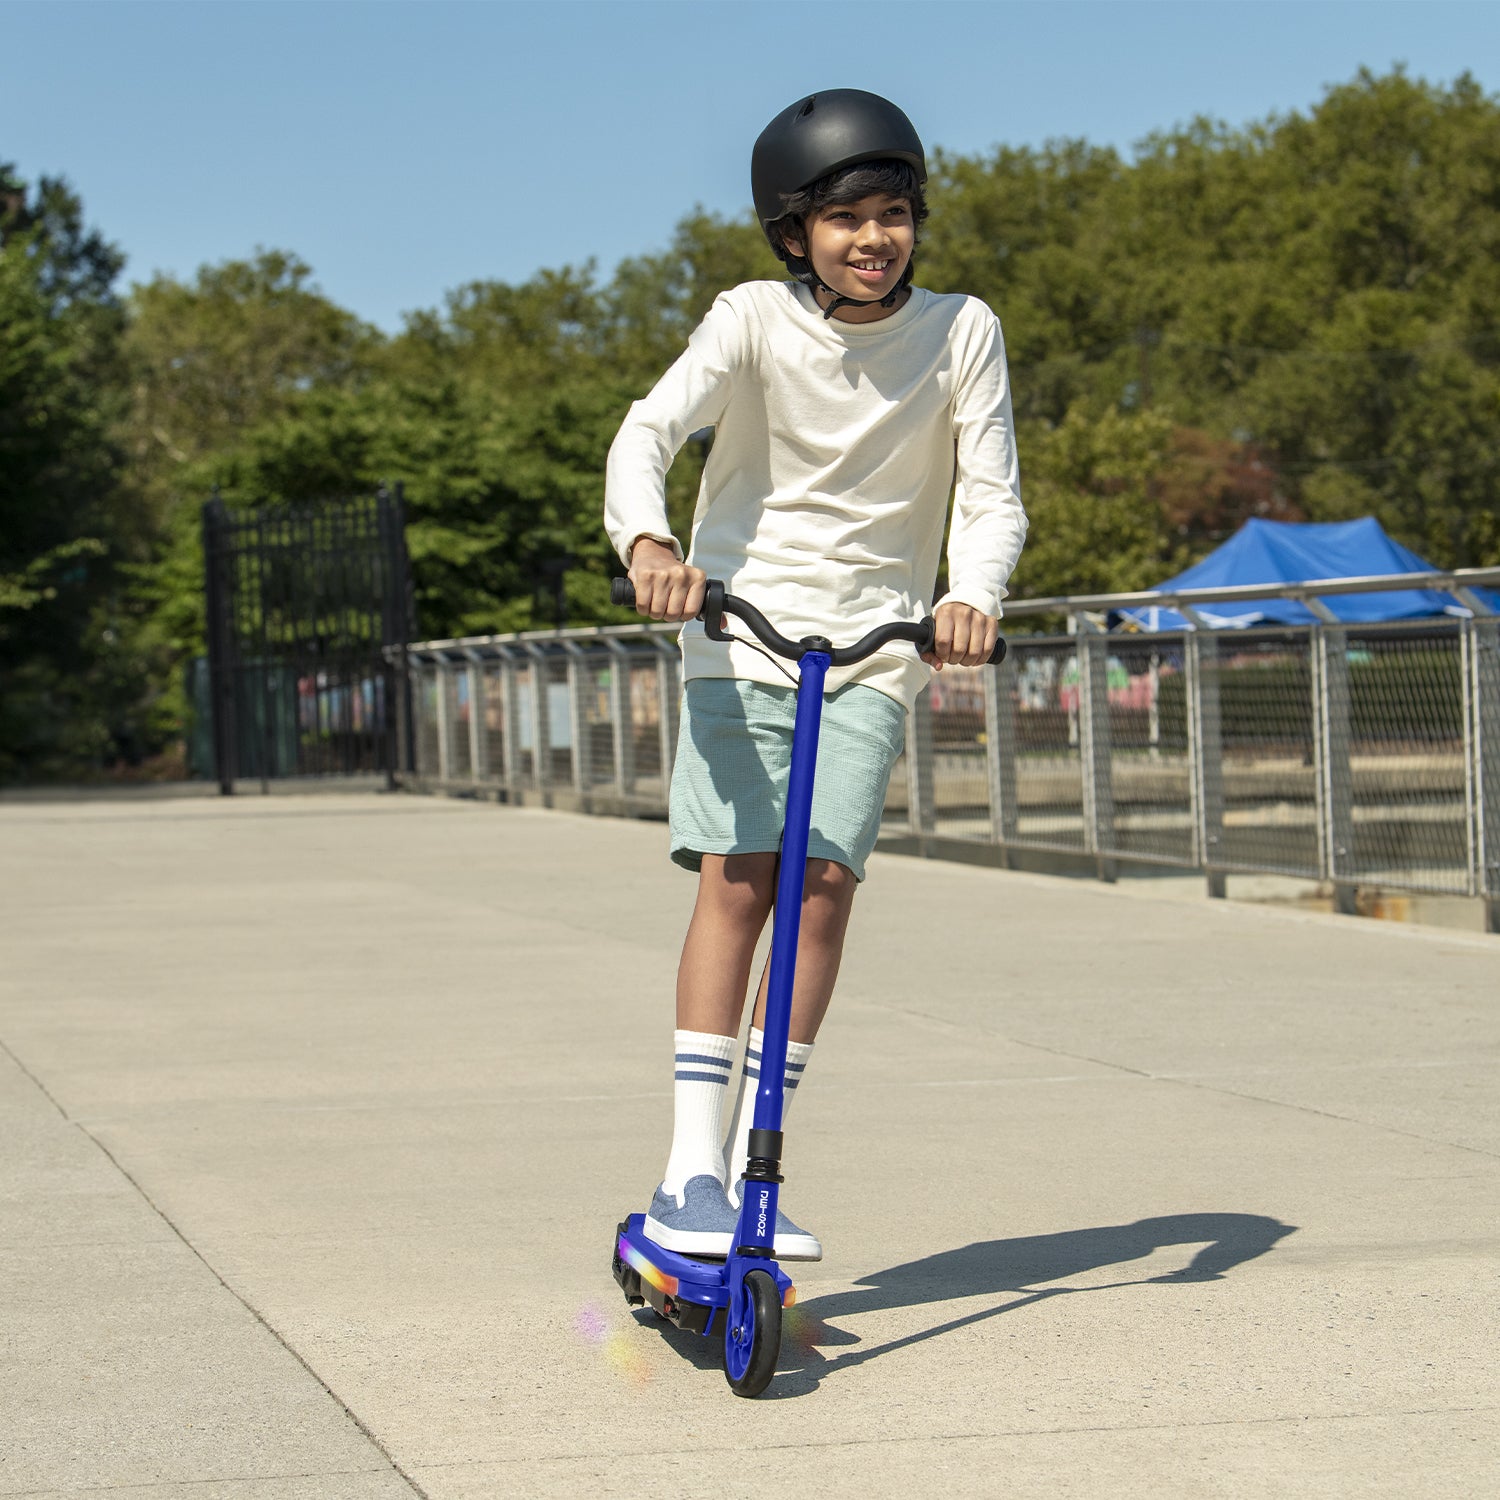 Boy riding the blue echo x electric scooter through a playground